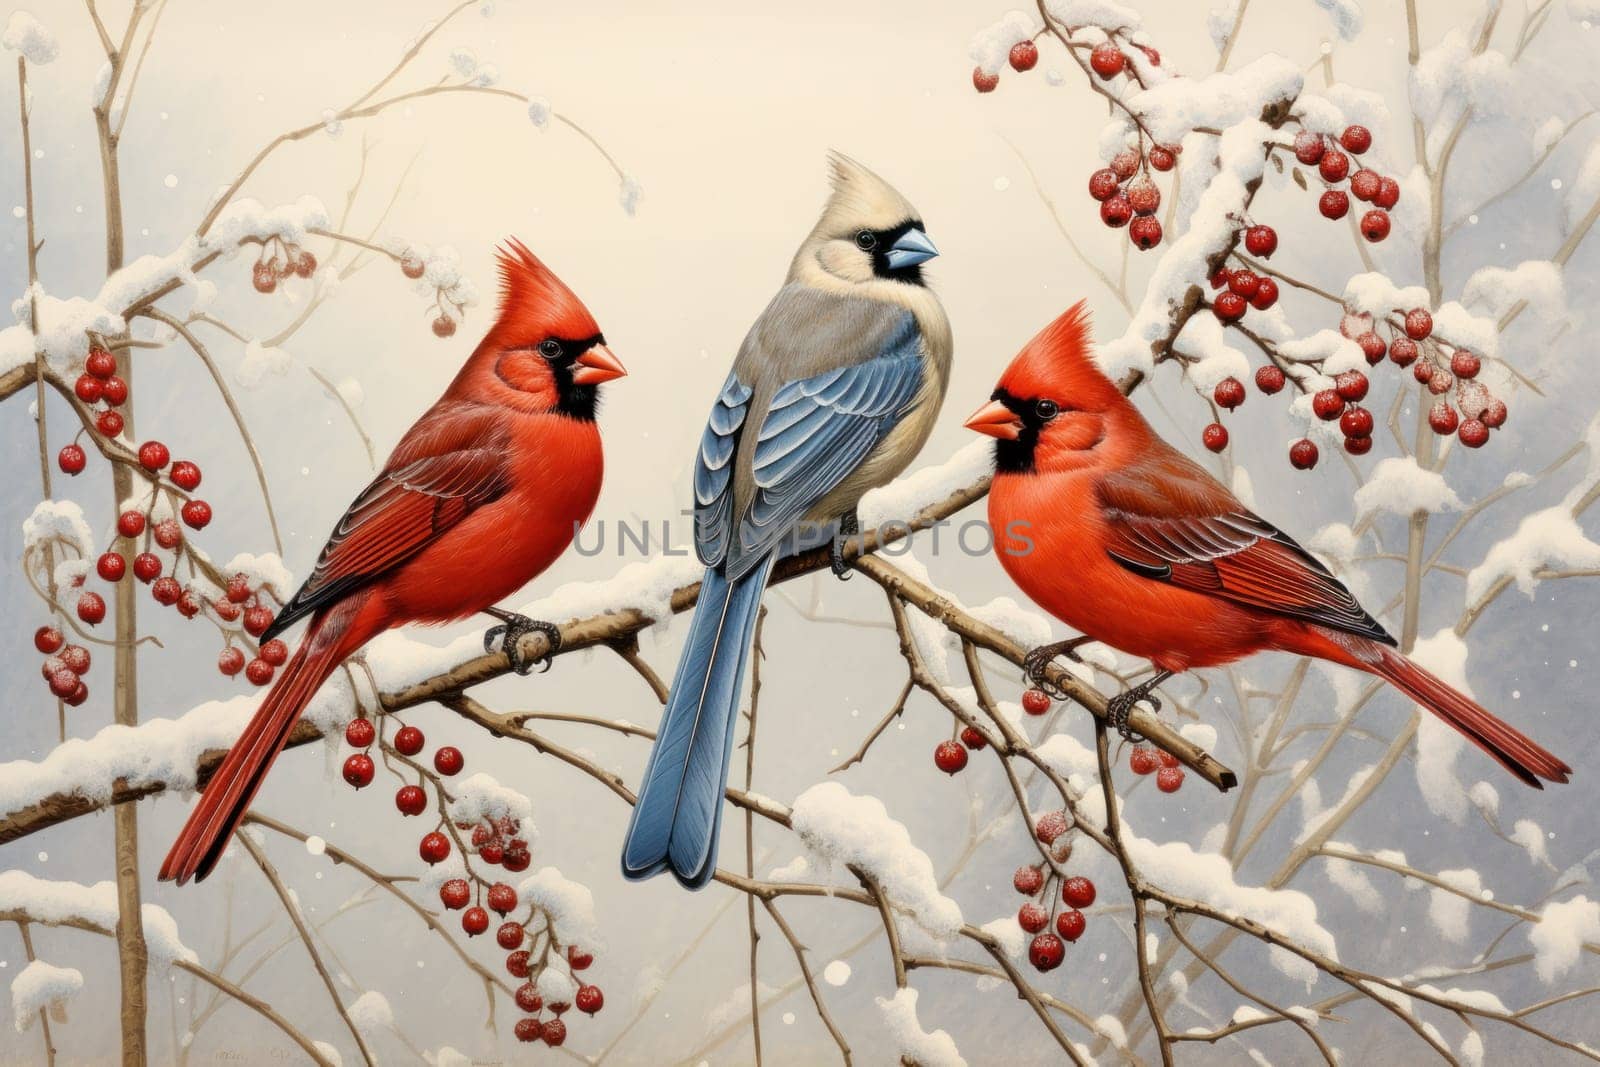 A stunning portrayal of winter's avian beauty, showcasing the artful photography of birds like cardinals, chickadees, and blue jays set against the pristine canvas of snow.